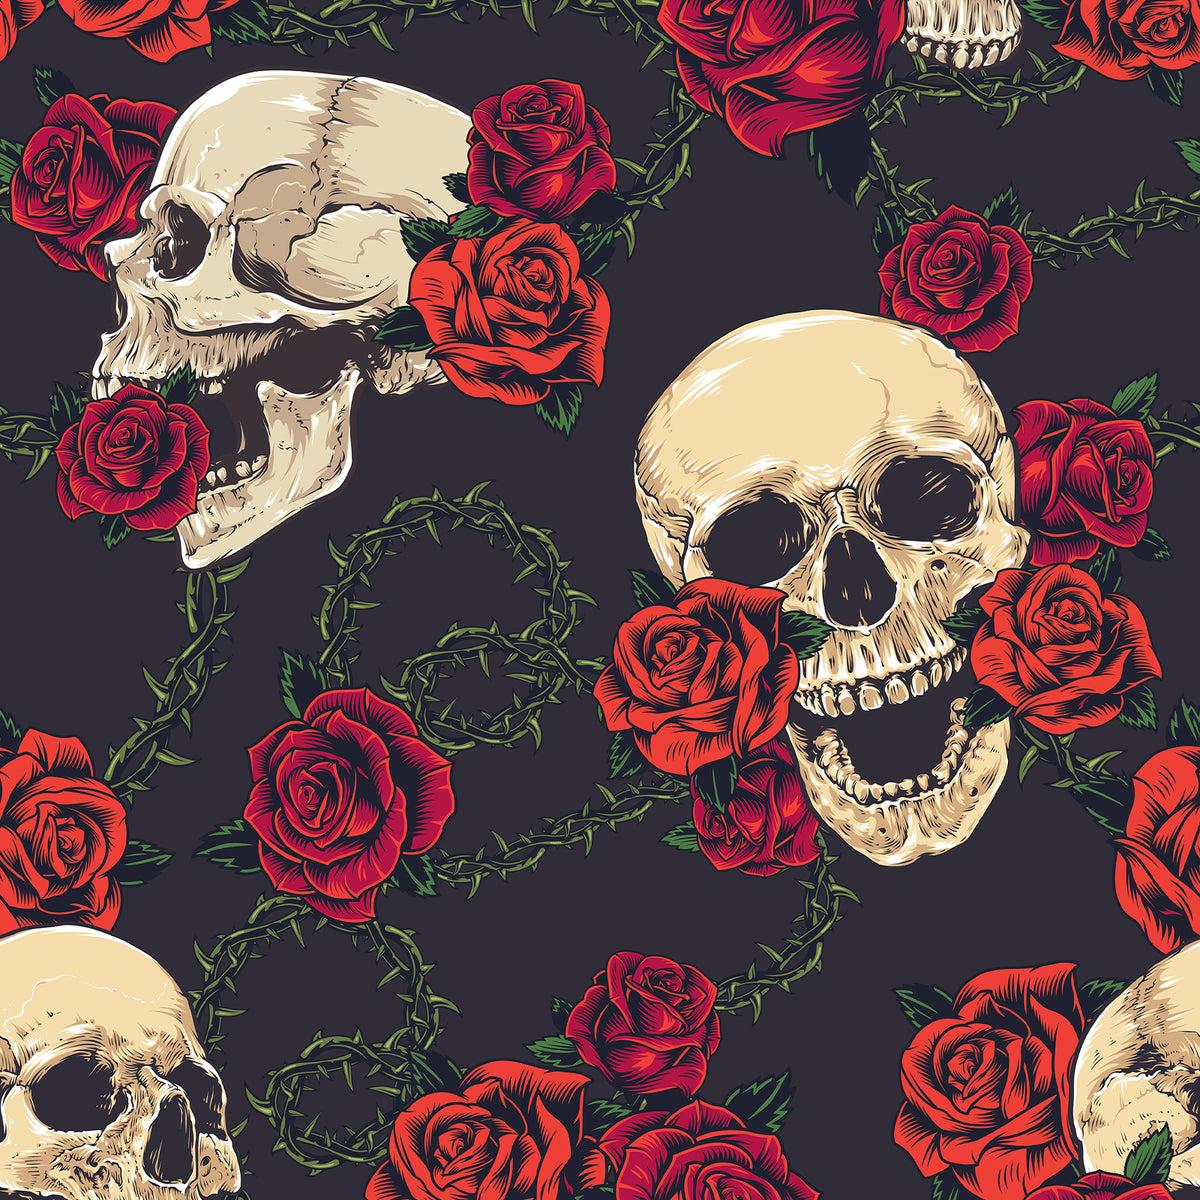 Skull with Roses Wallpapers - Top Free Skull with Roses Backgrounds ...